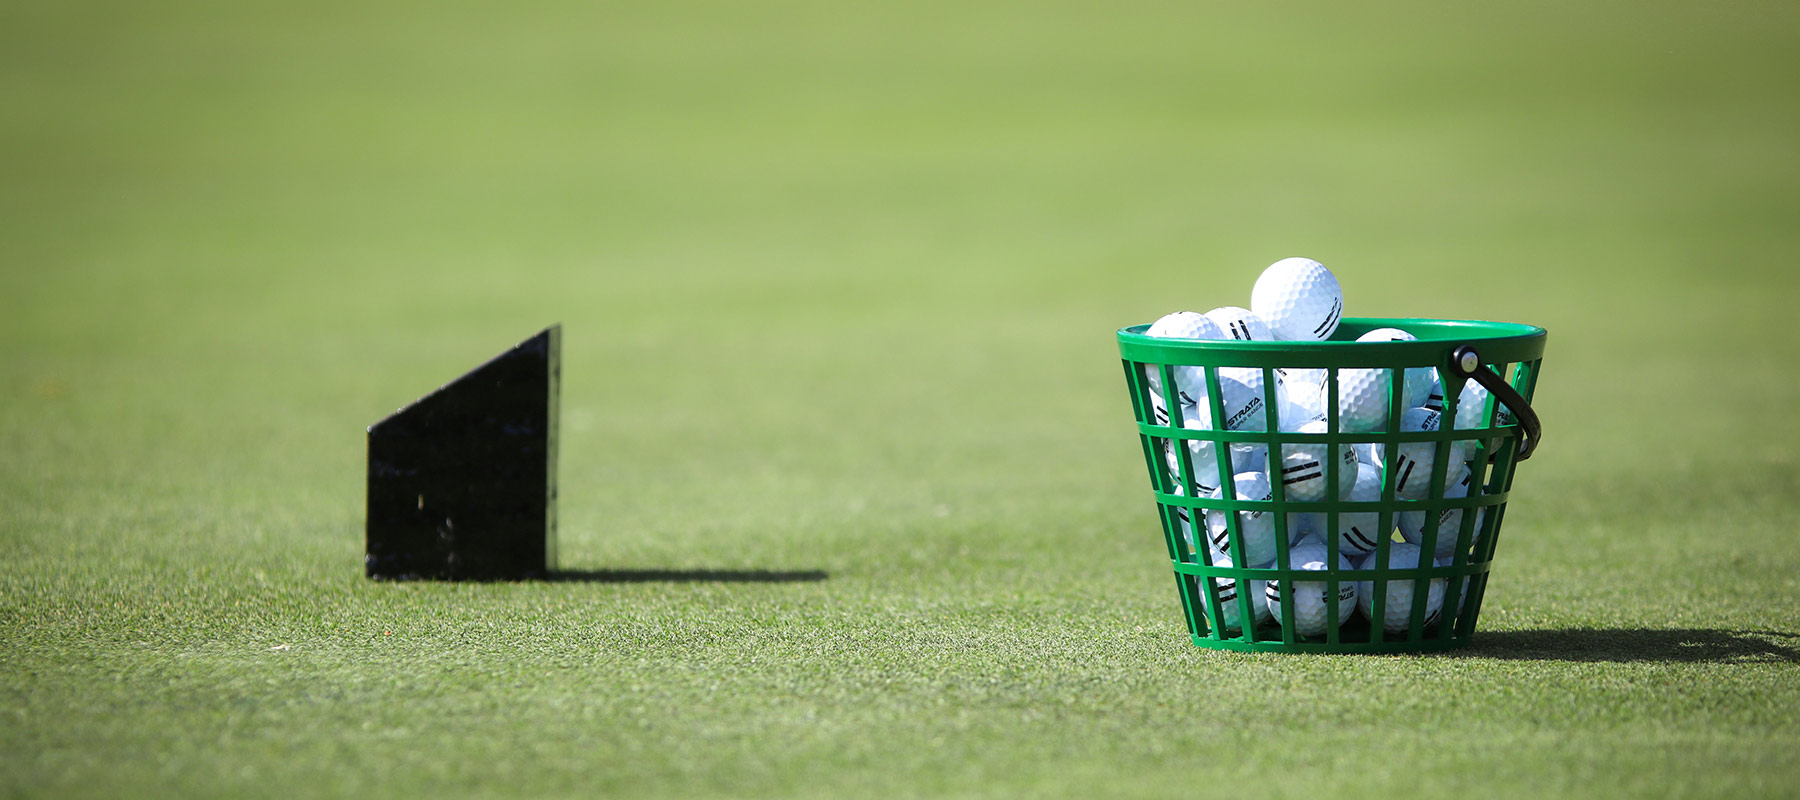 Golf balls in a basket on course